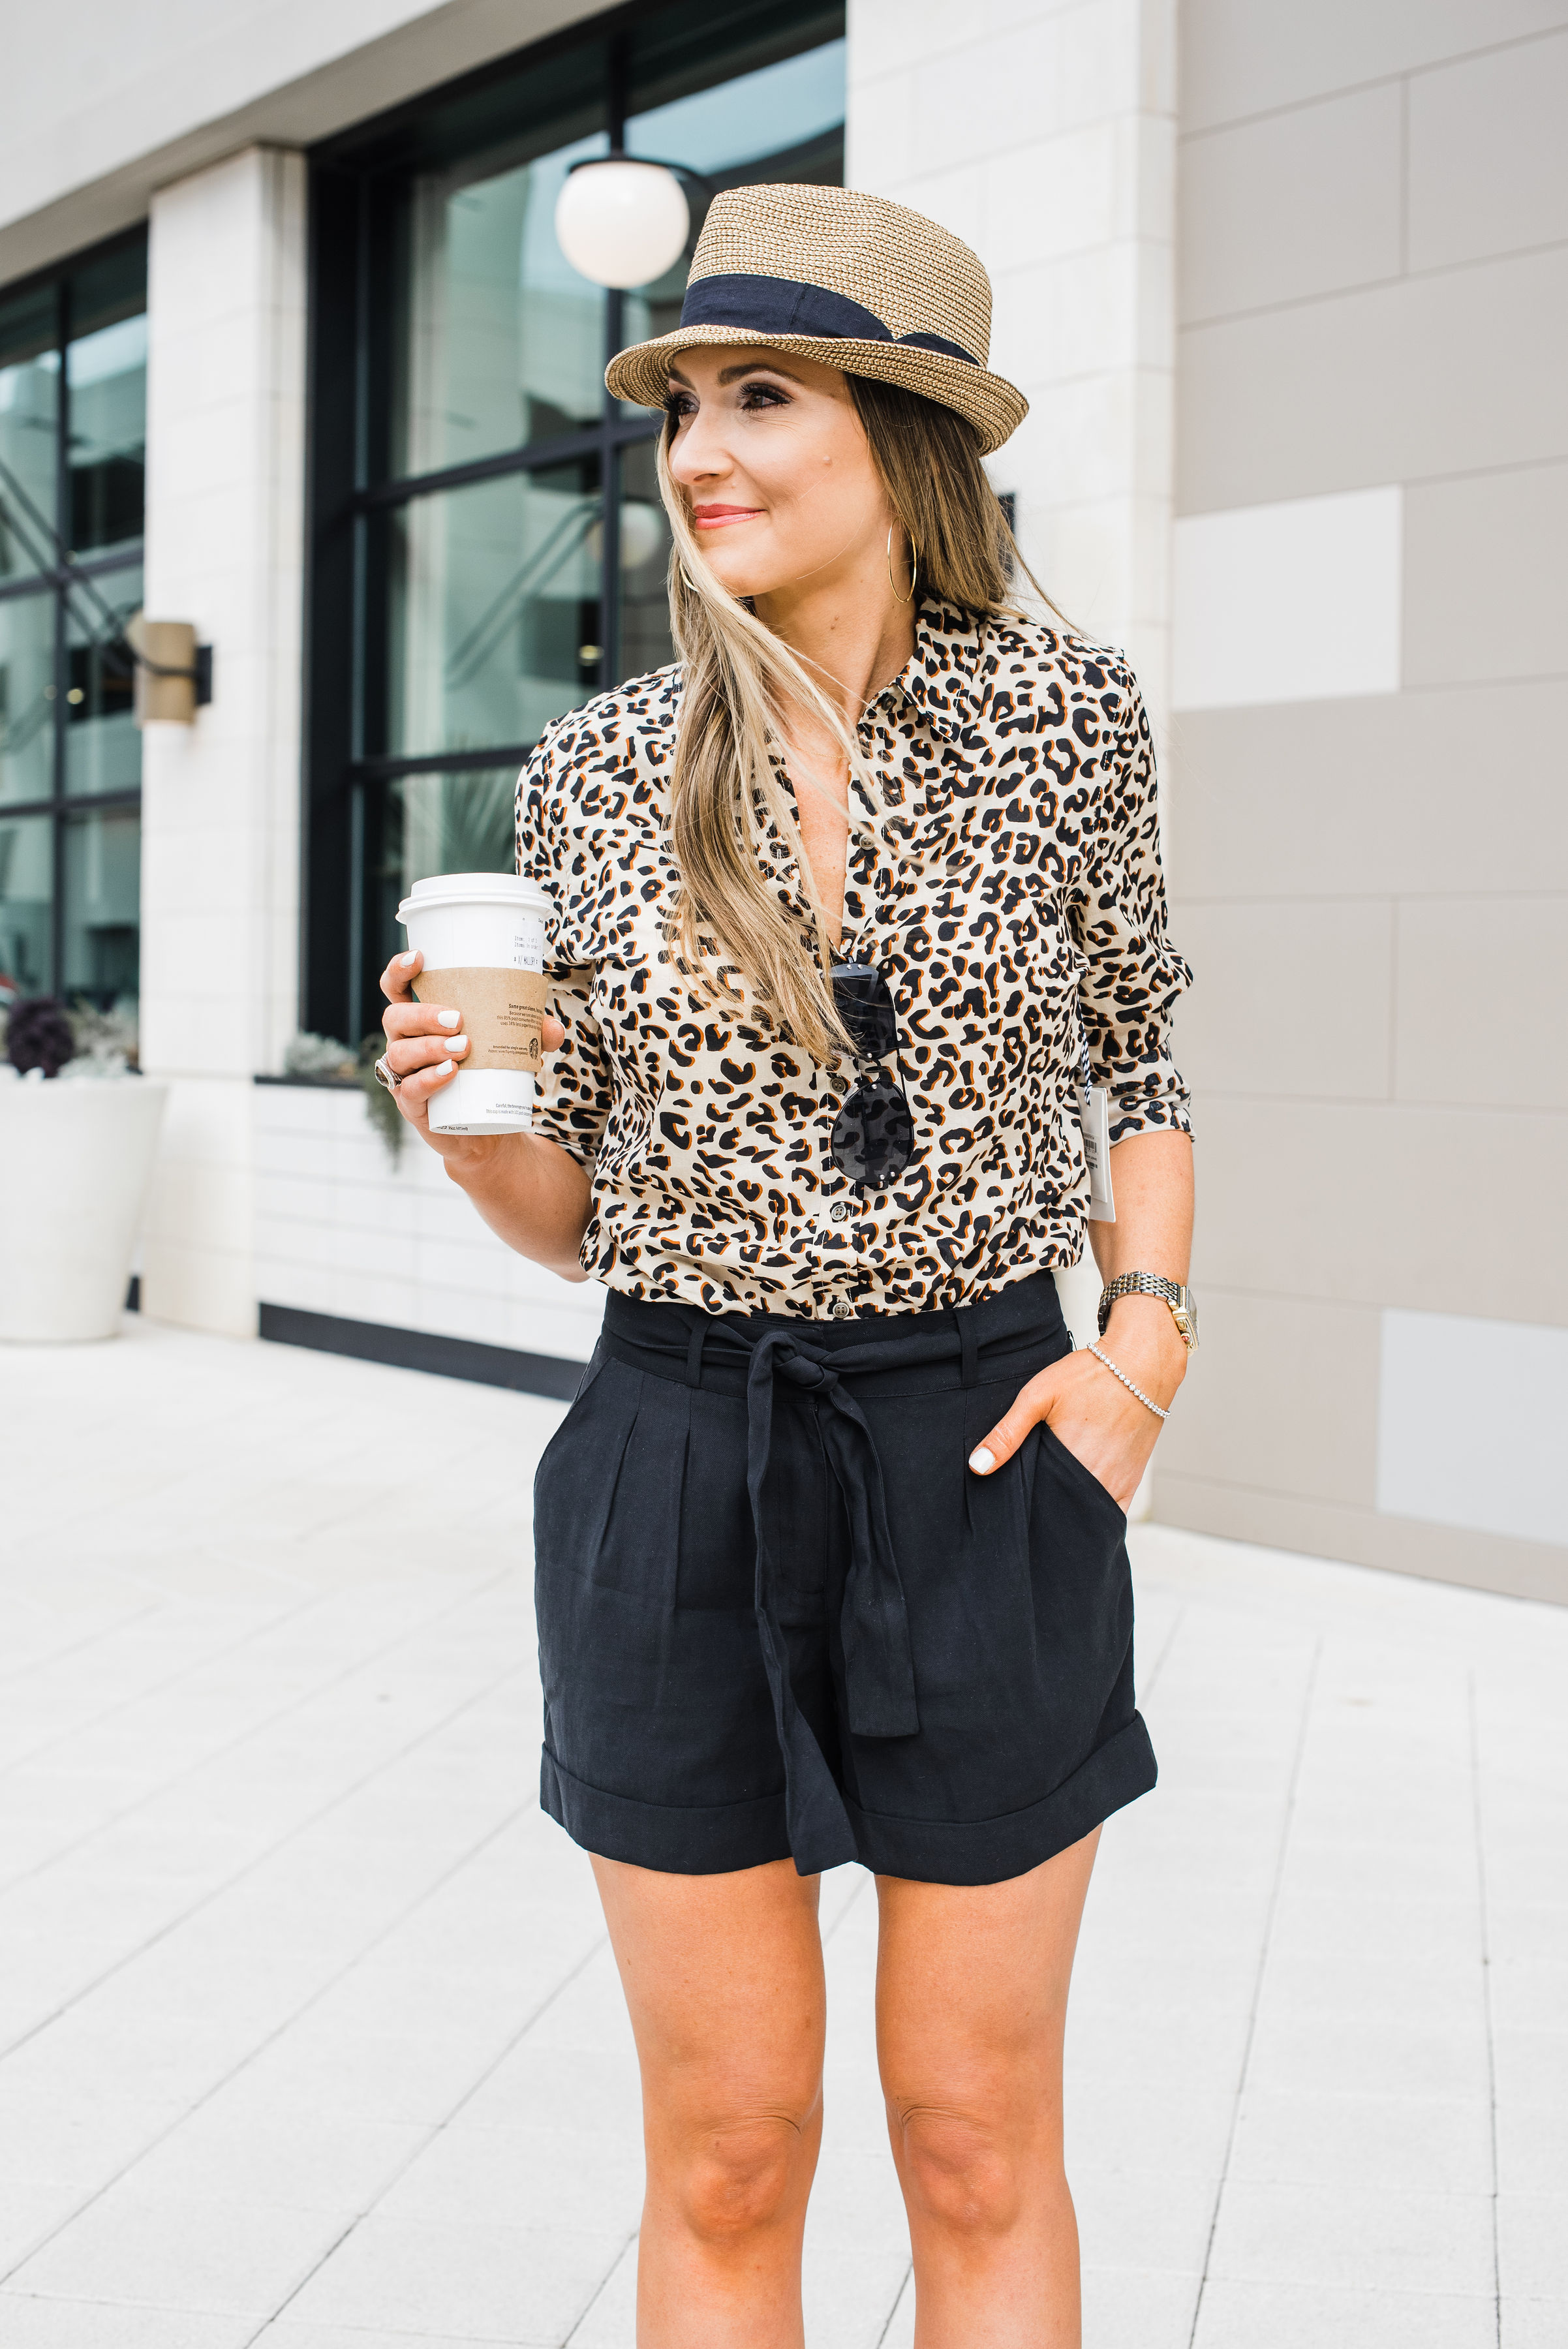 How to wear animal prints for Spring | Style Your Senses